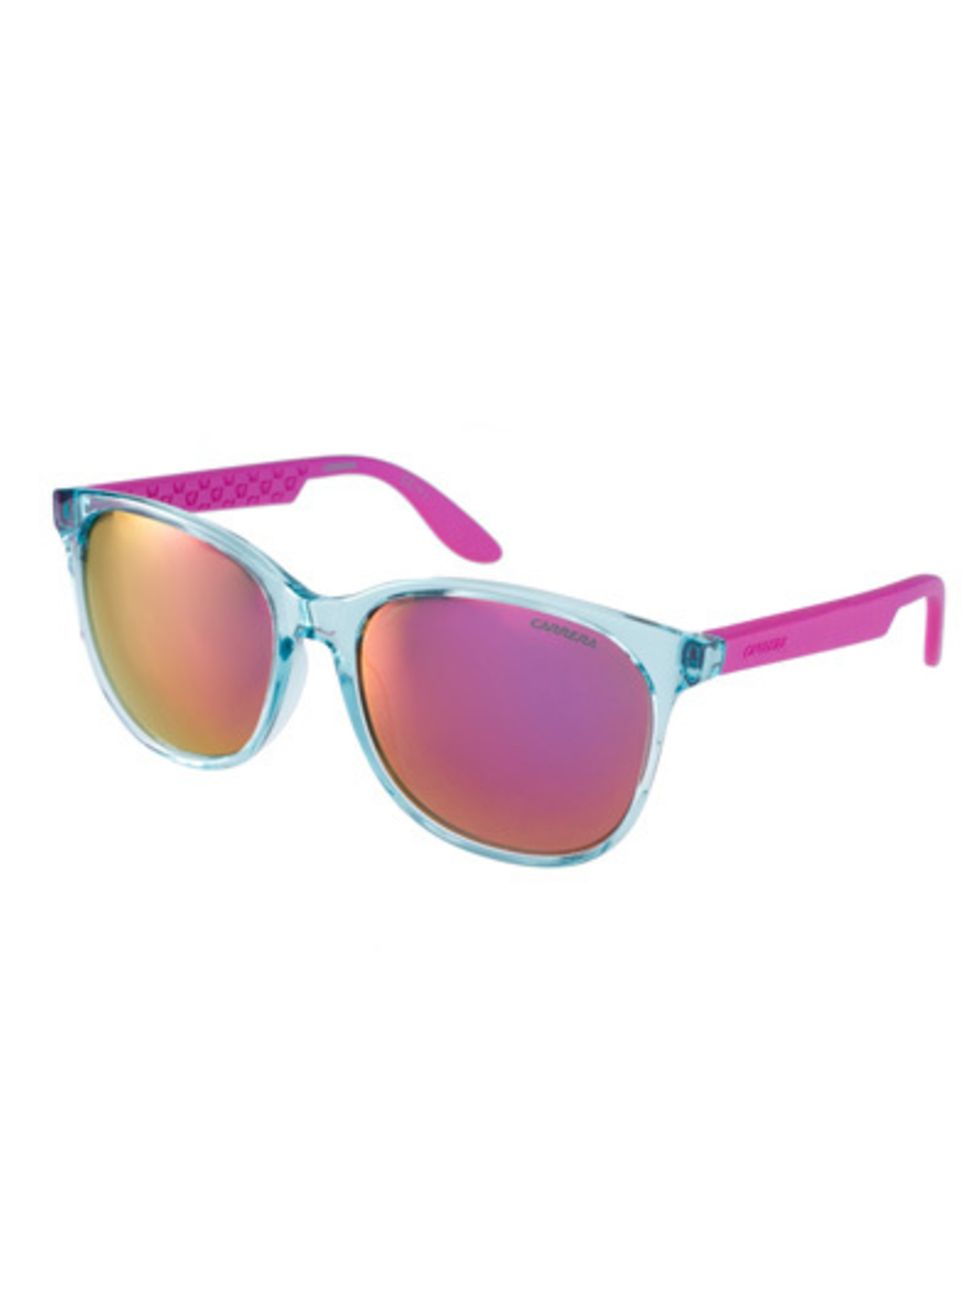 Eyewear, Glasses, Vision care, Product, Brown, Sunglasses, Personal protective equipment, Photograph, Magenta, Glass, 